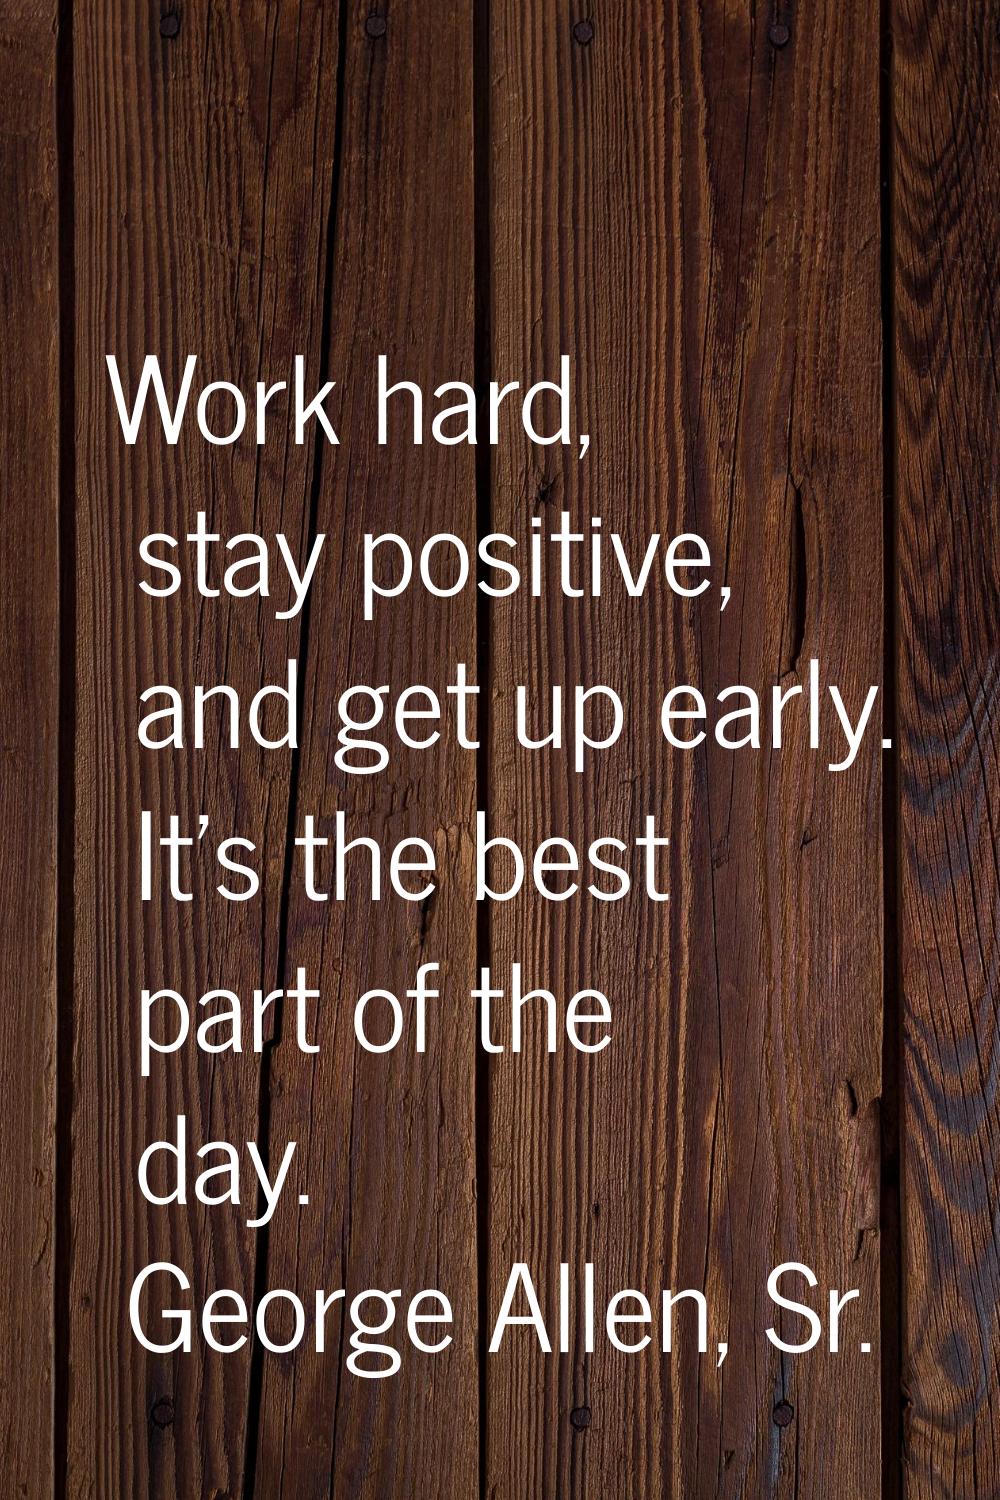 Work hard, stay positive, and get up early. It's the best part of the day.